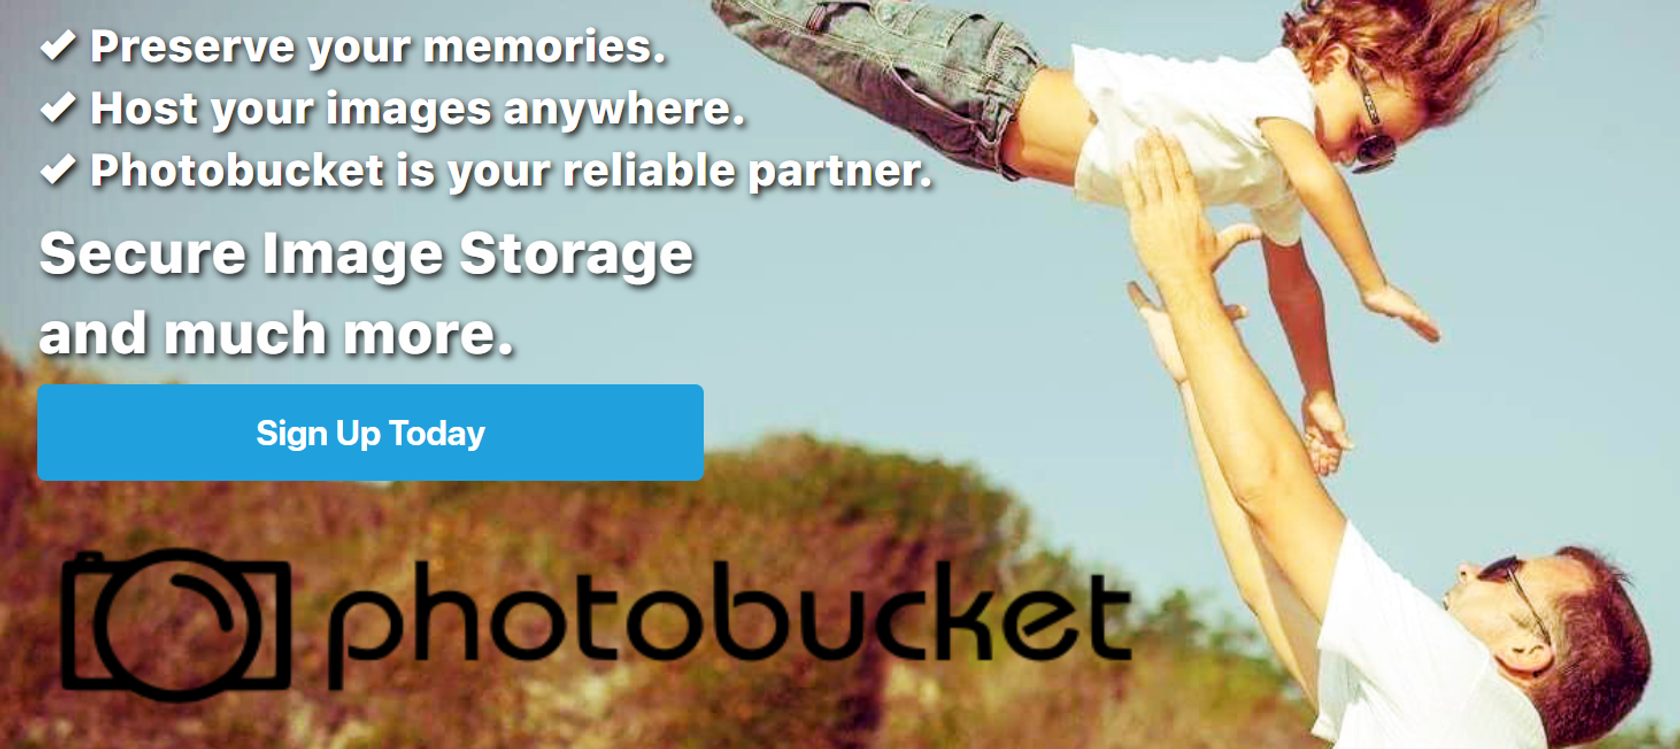 Browse all of the Friendship Gifs photos, GIFs and videos. Find just what  you're looking for on Photobucket